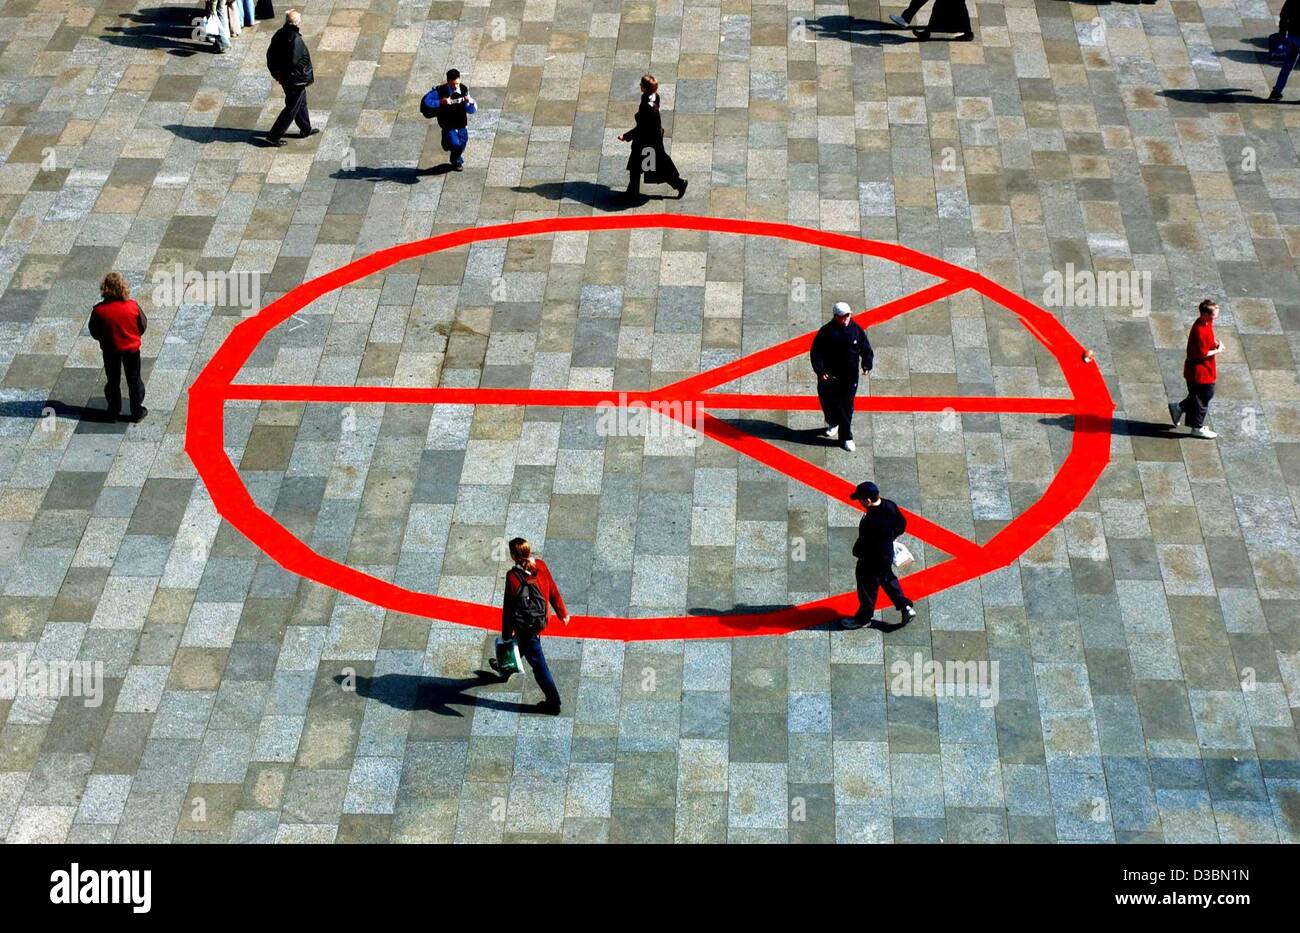 (dpa) - Peace activists have painted a large peace symbole in red paint across a central market square in front of the Cologne cathedrale in Cologne, Germany, 4 April 2003. The action is a sign of protest against the war with Iraq. Stock Photo